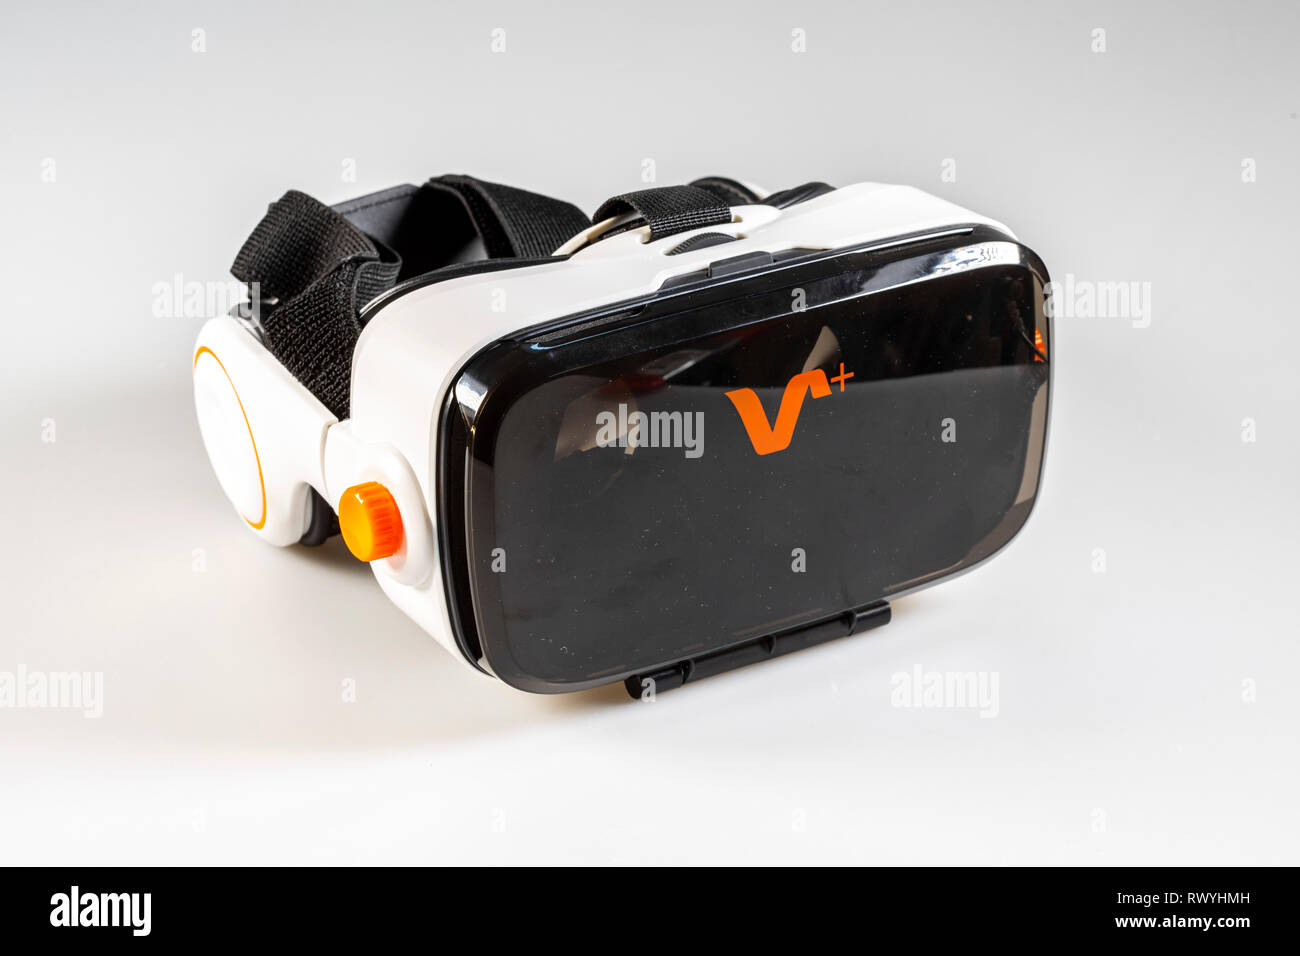 VR-Brille, Virtual Reality Brille, 3-D-Animation, Stockfoto